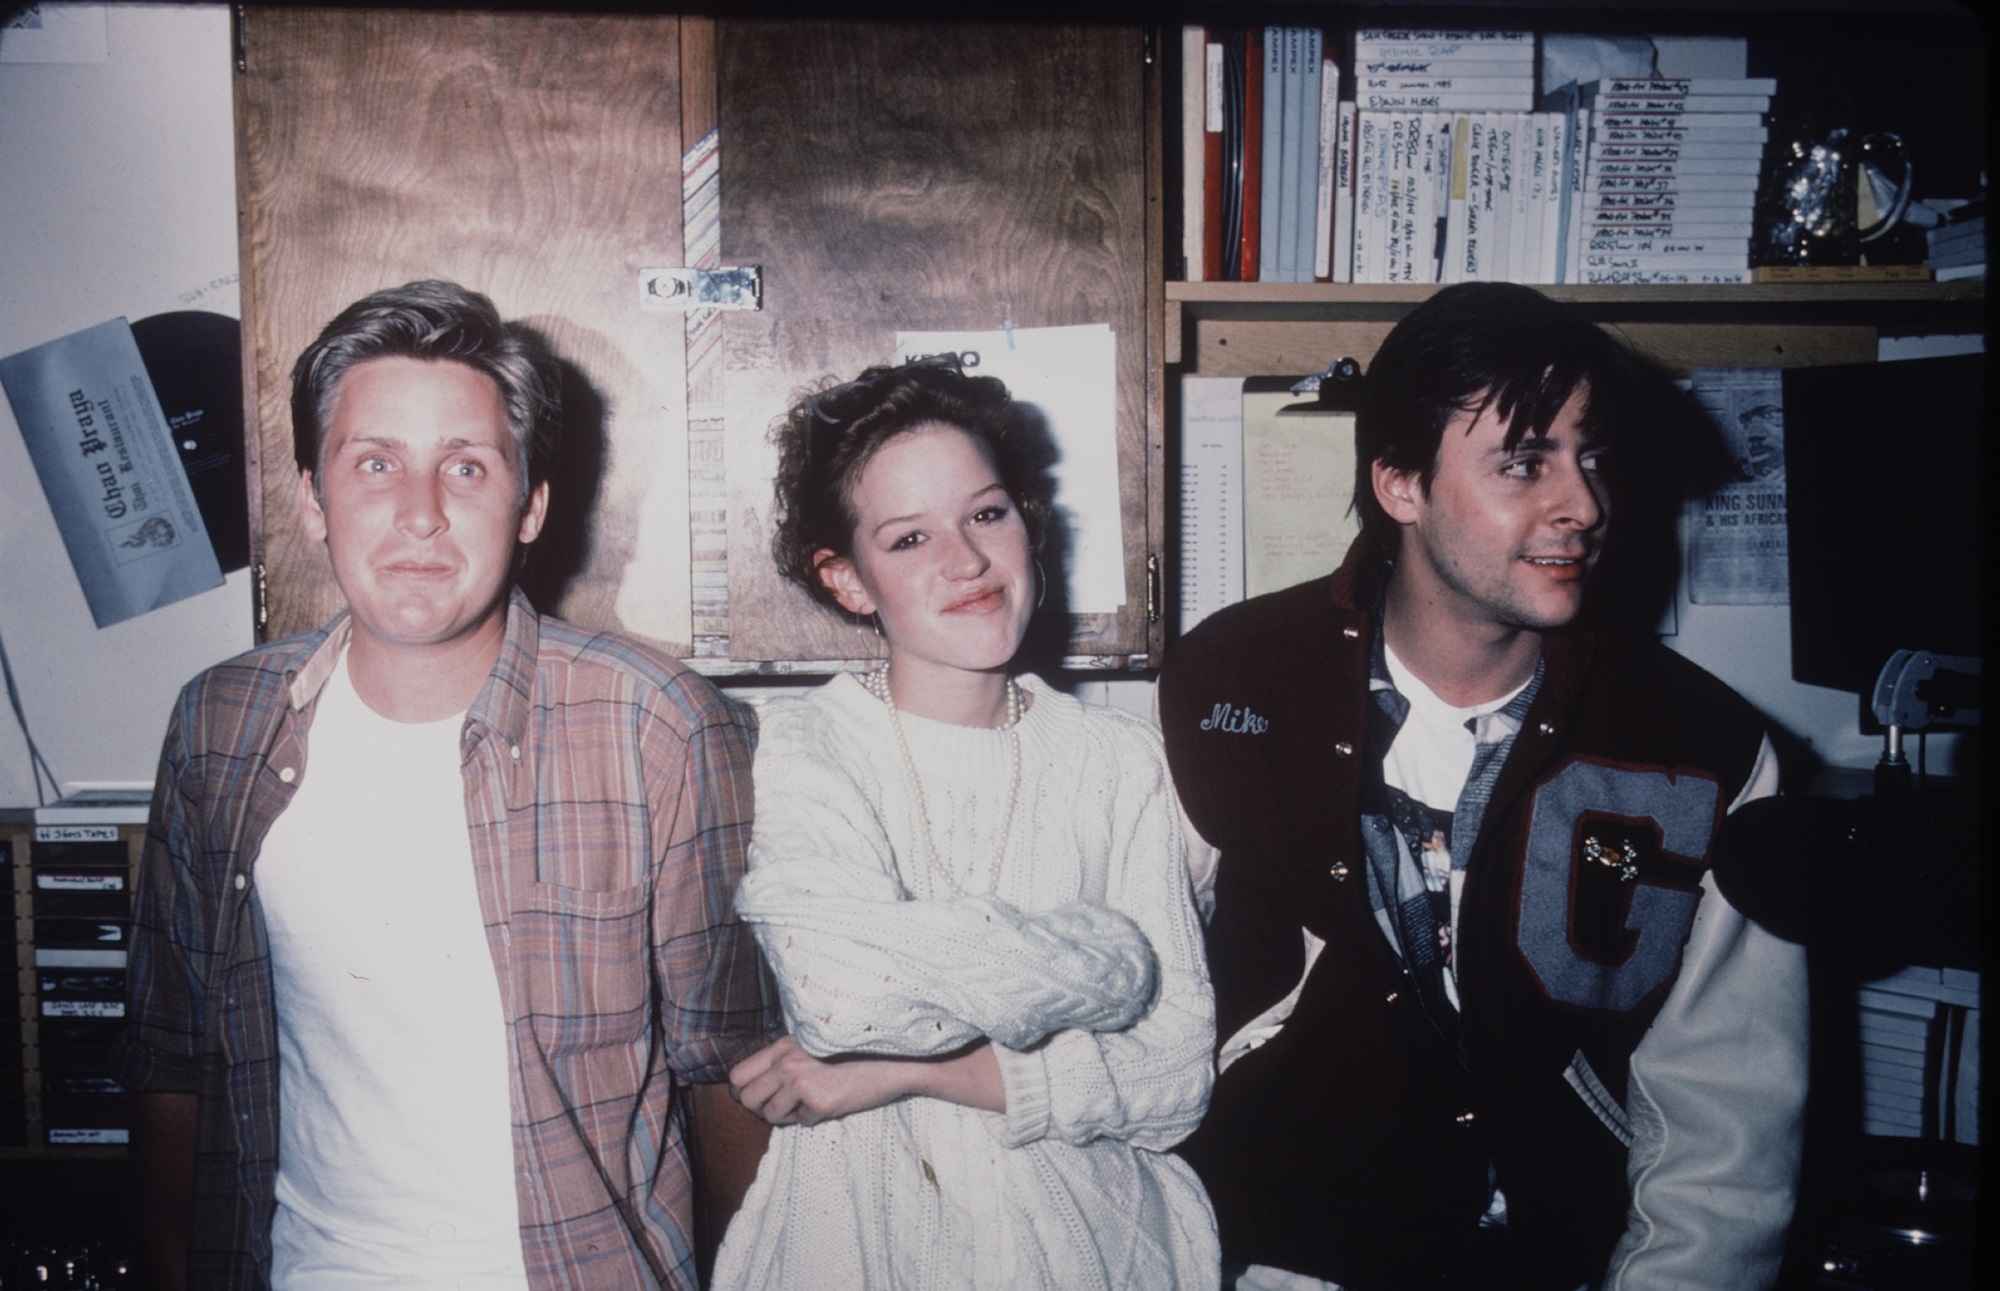 Actors Emilio Estevez, Molly Ringwald, and Judd Nelson smile in a candid photo together